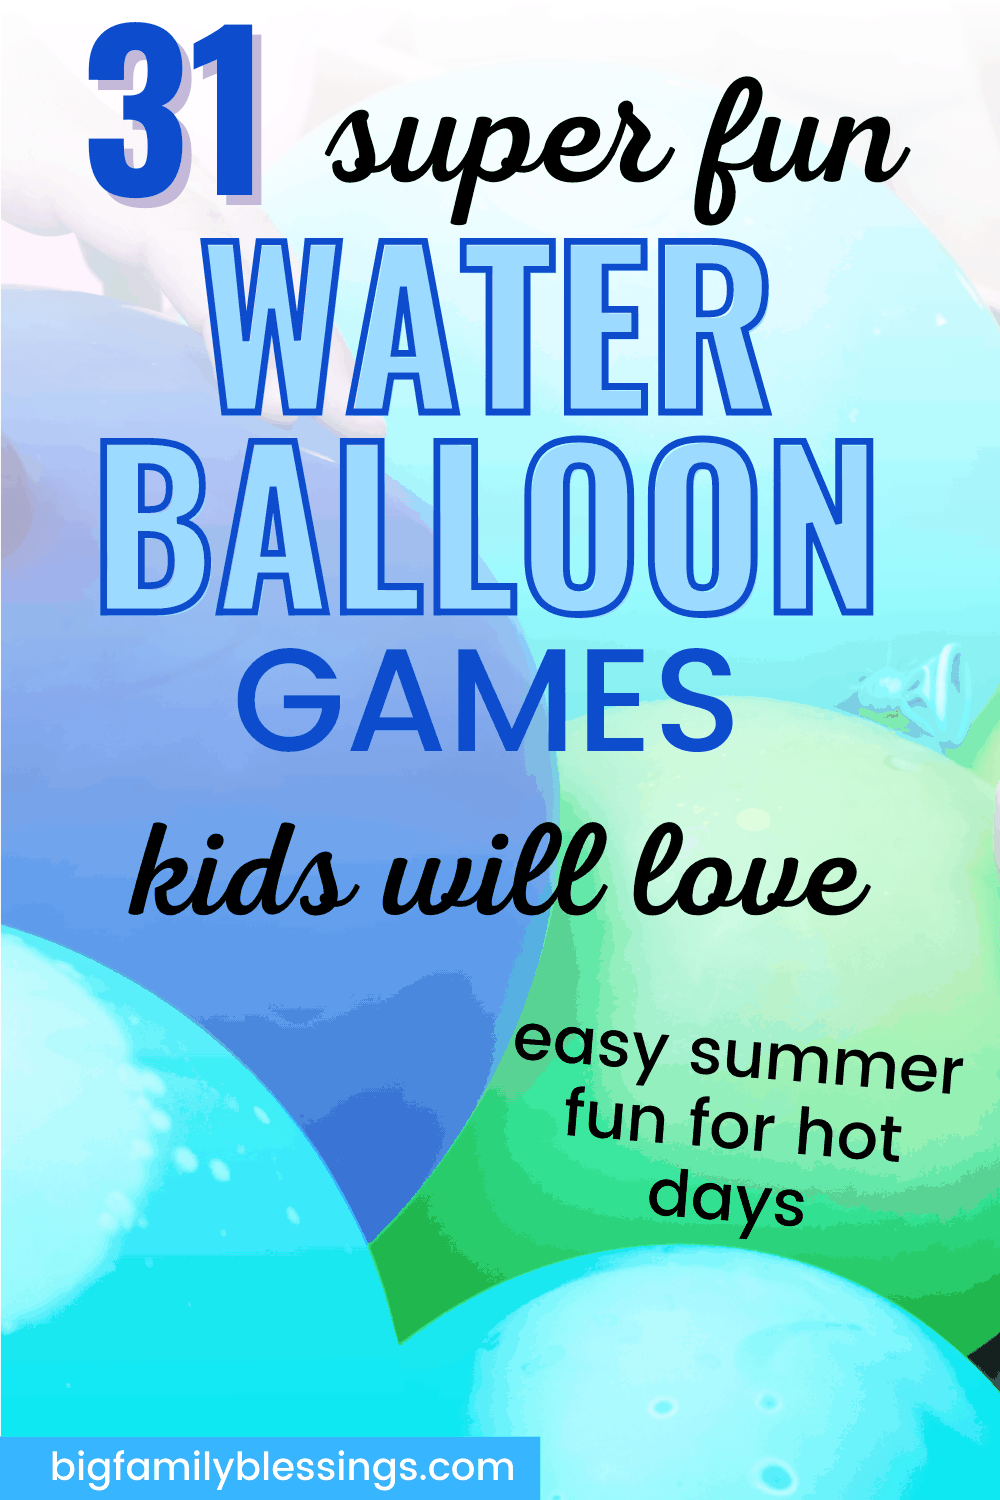 Water Balloons for Kids Girls Boys Balloons Set Party Games Quick Fill 660 Balloons 18 Bunches for Swimming Pool Outdoor Summer Fun LPL1 